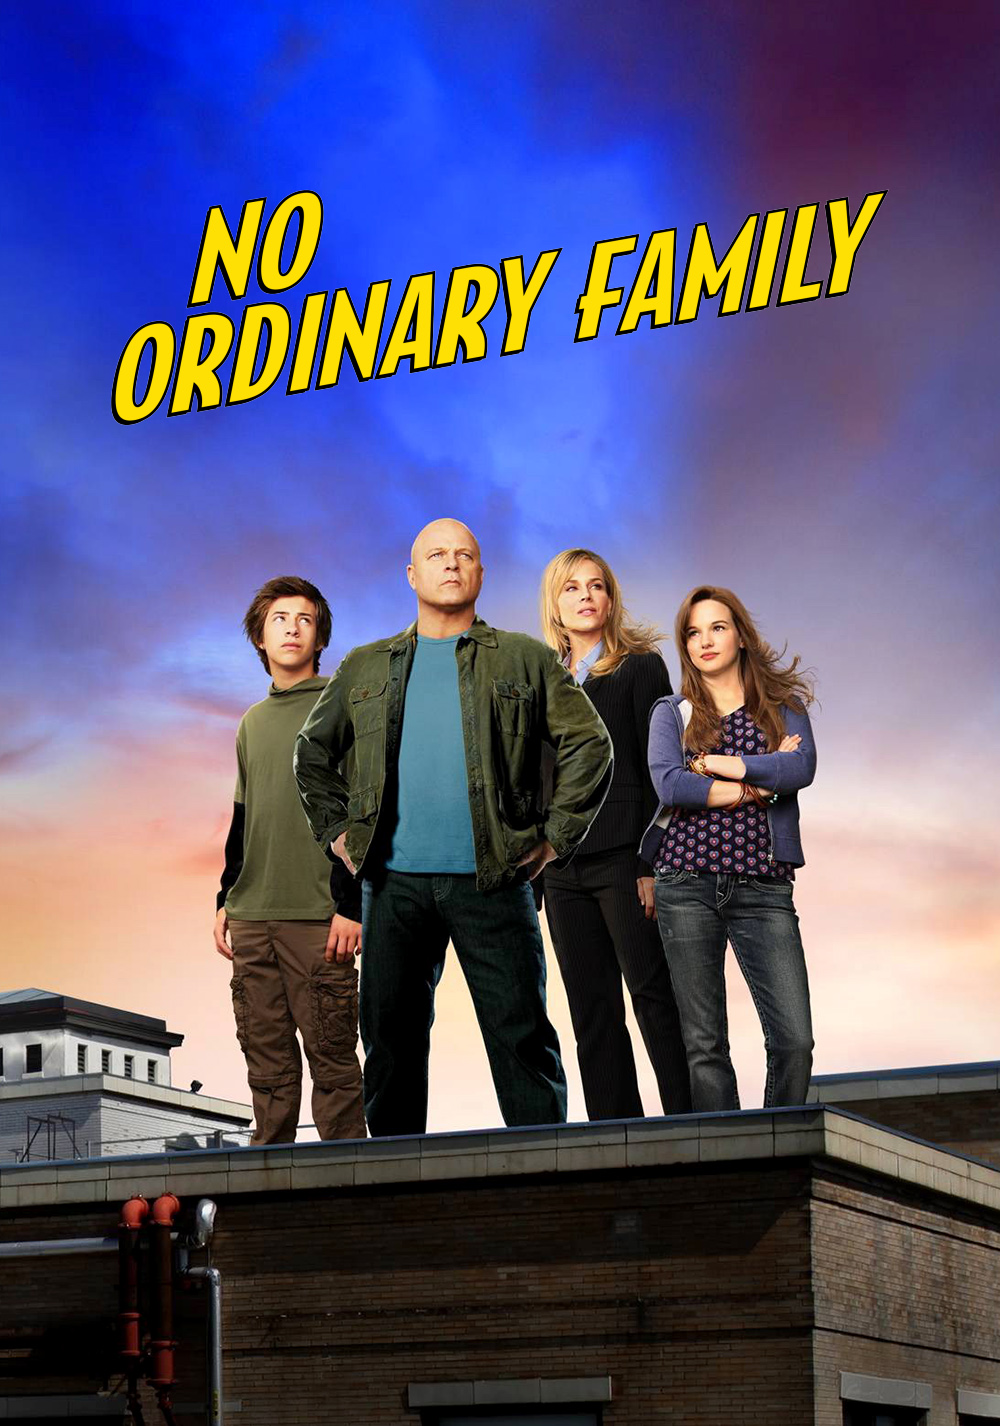 Download No Ordinary Family Season 1 (English with Subtitle) WeB-DL 720p [360MB] || 1080p [1GB]